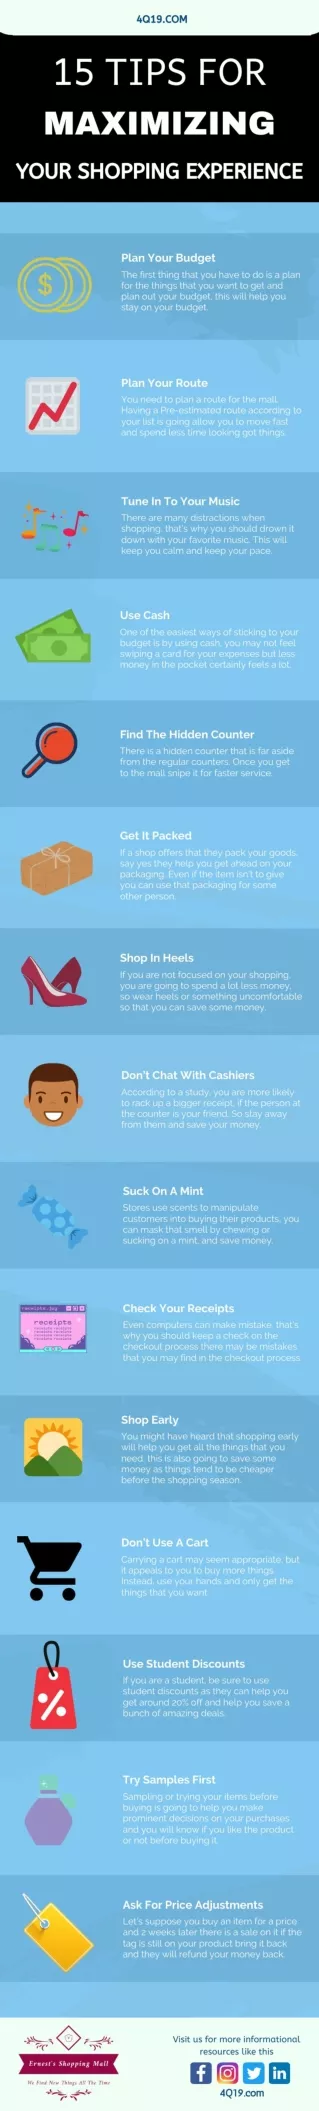 15 Tips For Maximizing Your Shopping Experience